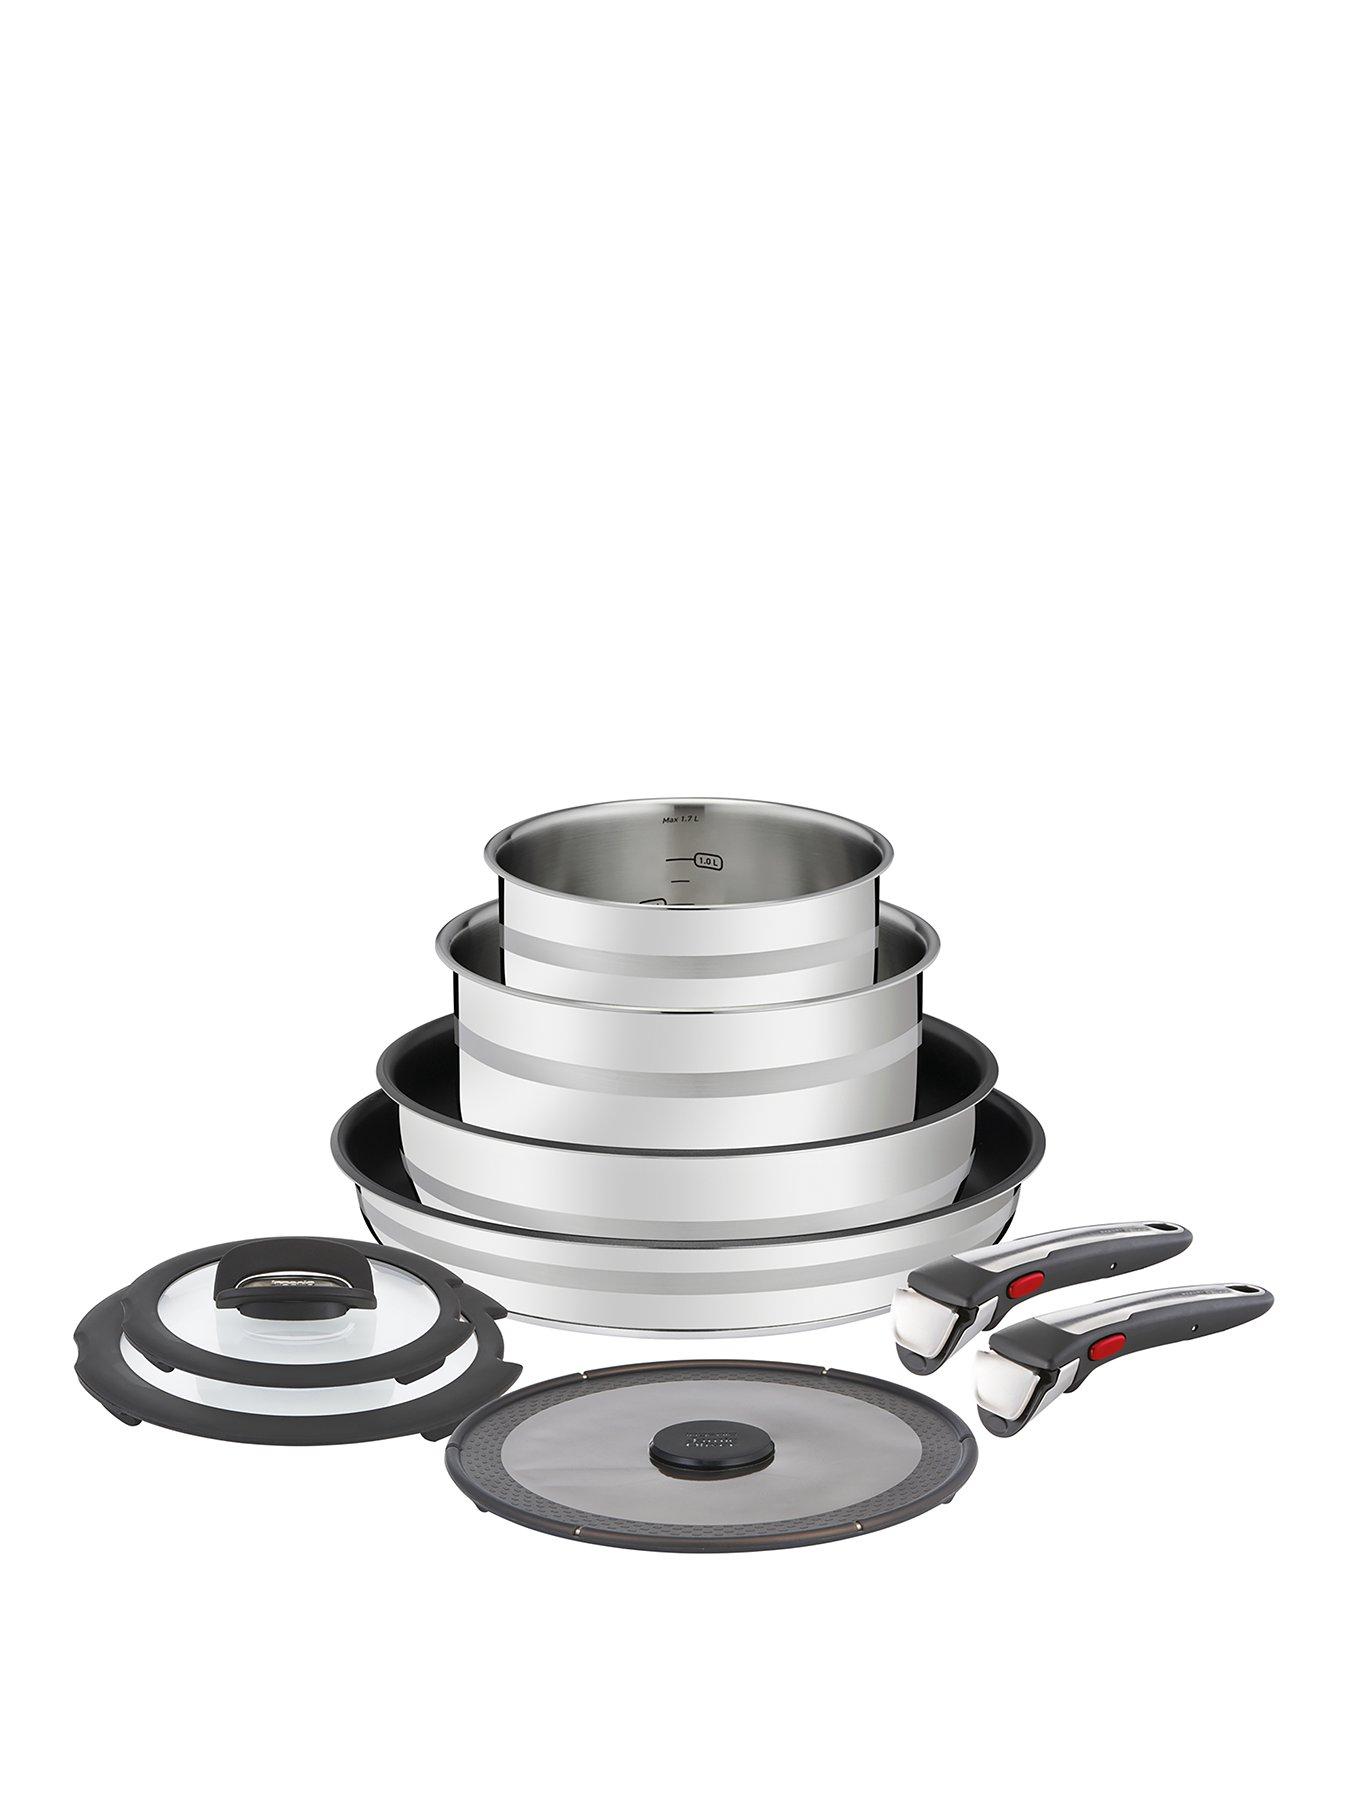 https://media.very.co.uk/i/very/VLJPA_SQ1_0000000088_NO_COLOR_SLf/tefal-jamie-oliver-by-tefal-ingenio-9-piece-removable-handle-stackable-induction-compatible-pan-set.jpg?$180x240_retinamobilex2$&$roundel_very$&p1_img=sale_2017